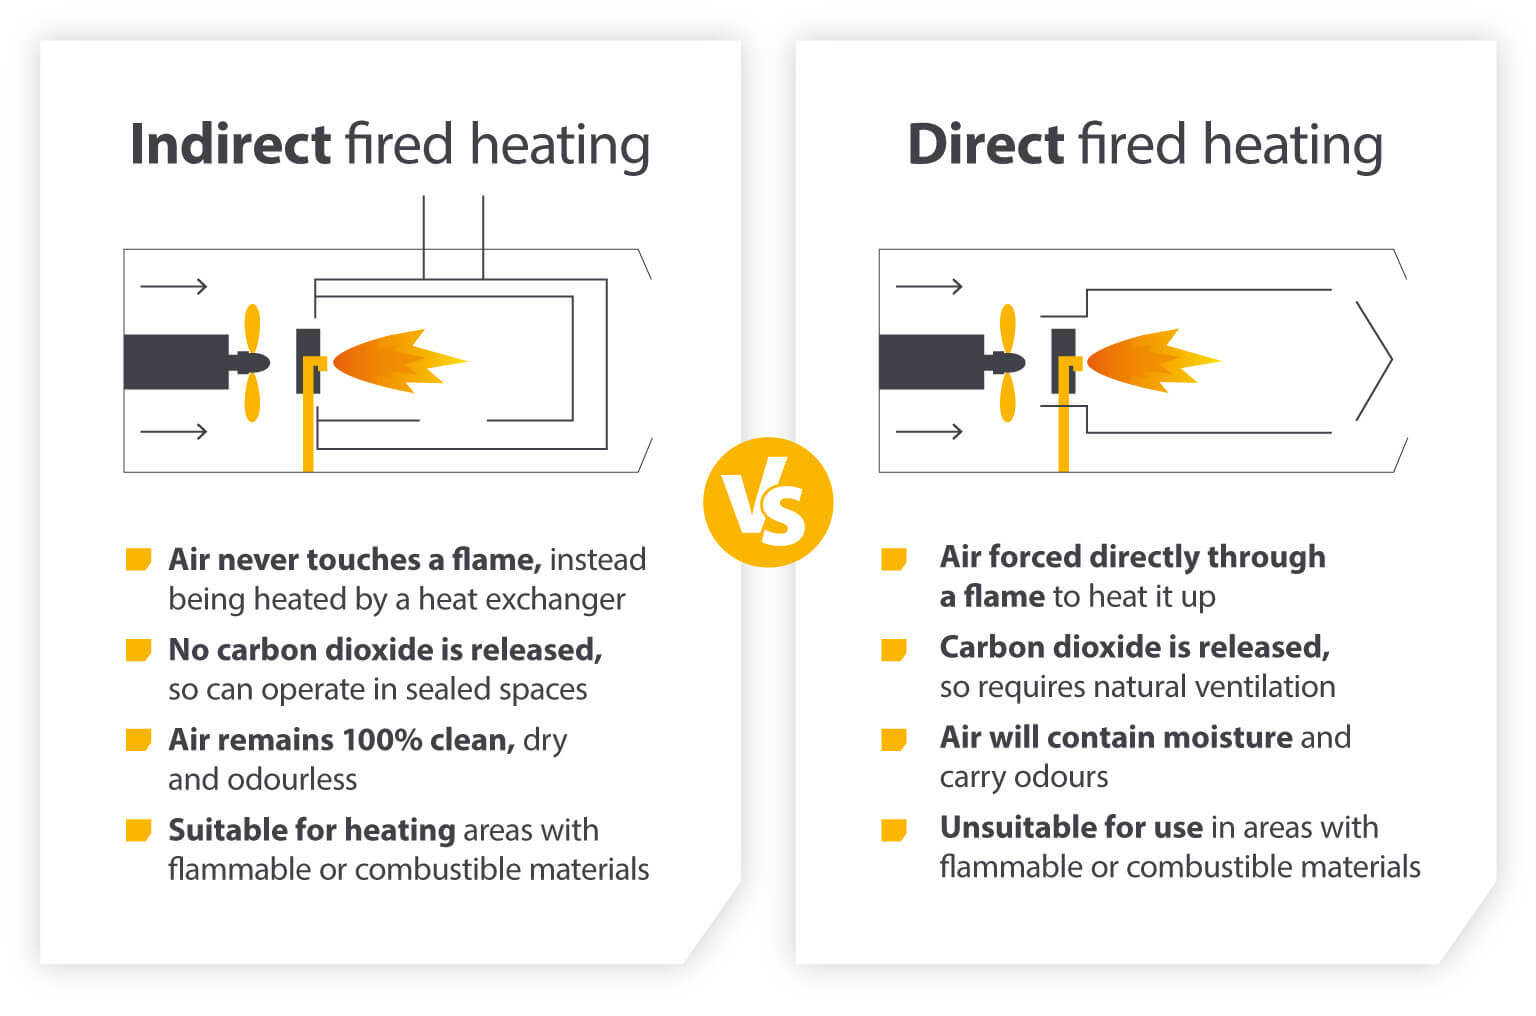 Indirect fired heating vs direct fired heating